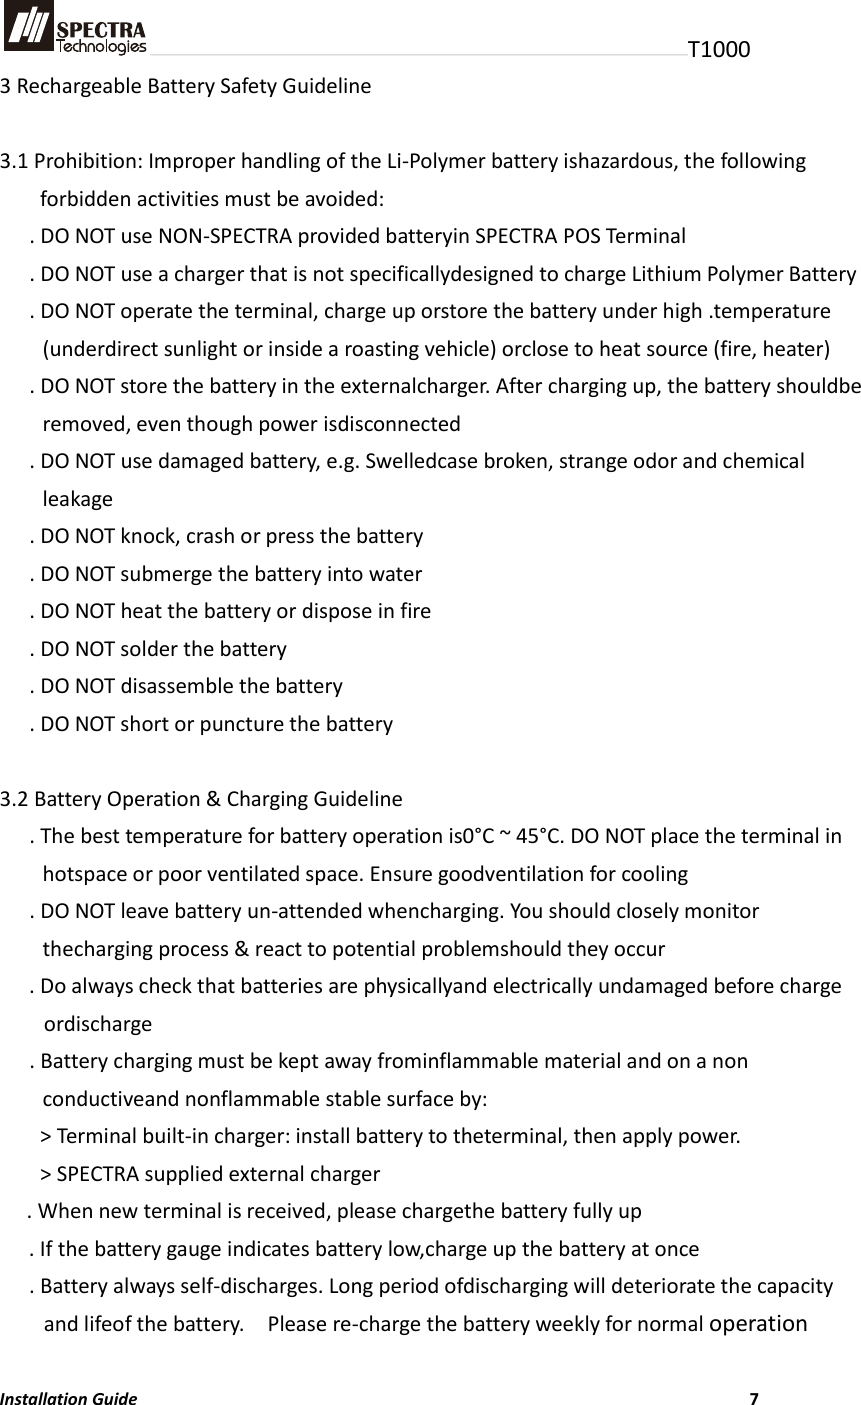 T1000 3 Rechargeable Battery Safety Guideline  3.1 Prohibition: Improper handling of the Li-Polymer battery ishazardous, the following forbidden activities must be avoided: . DO NOT use NON-SPECTRA provided batteryin SPECTRA POS Terminal . DO NOT use a charger that is not specificallydesigned to charge Lithium Polymer Battery . DO NOT operate the terminal, charge up orstore the battery under high .temperature (underdirect sunlight or inside a roasting vehicle) orclose to heat source (fire, heater) . DO NOT store the battery in the externalcharger. After charging up, the battery shouldbe removed, even though power isdisconnected . DO NOT use damaged battery, e.g. Swelledcase broken, strange odor and chemical leakage . DO NOT knock, crash or press the battery . DO NOT submerge the battery into water . DO NOT heat the battery or dispose in fire . DO NOT solder the battery . DO NOT disassemble the battery . DO NOT short or puncture the battery  3.2 Battery Operation &amp; Charging Guideline . The best temperature for battery operation is0°C ~ 45°C. DO NOT place the terminal in hotspace or poor ventilated space. Ensure goodventilation for cooling . DO NOT leave battery un-attended whencharging. You should closely monitor thecharging process &amp; react to potential problemshould they occur . Do always check that batteries are physicallyand electrically undamaged before charge ordischarge . Battery charging must be kept away frominflammable material and on a non conductiveand nonflammable stable surface by: &gt; Terminal built-in charger: install battery to theterminal, then apply power. &gt; SPECTRA supplied external charger . When new terminal is received, please chargethe battery fully up . If the battery gauge indicates battery low,charge up the battery at once . Battery always self-discharges. Long period ofdischarging will deteriorate the capacity and lifeof the battery.    Please re-charge the battery weekly for normal operation  Installation Guide                          7 